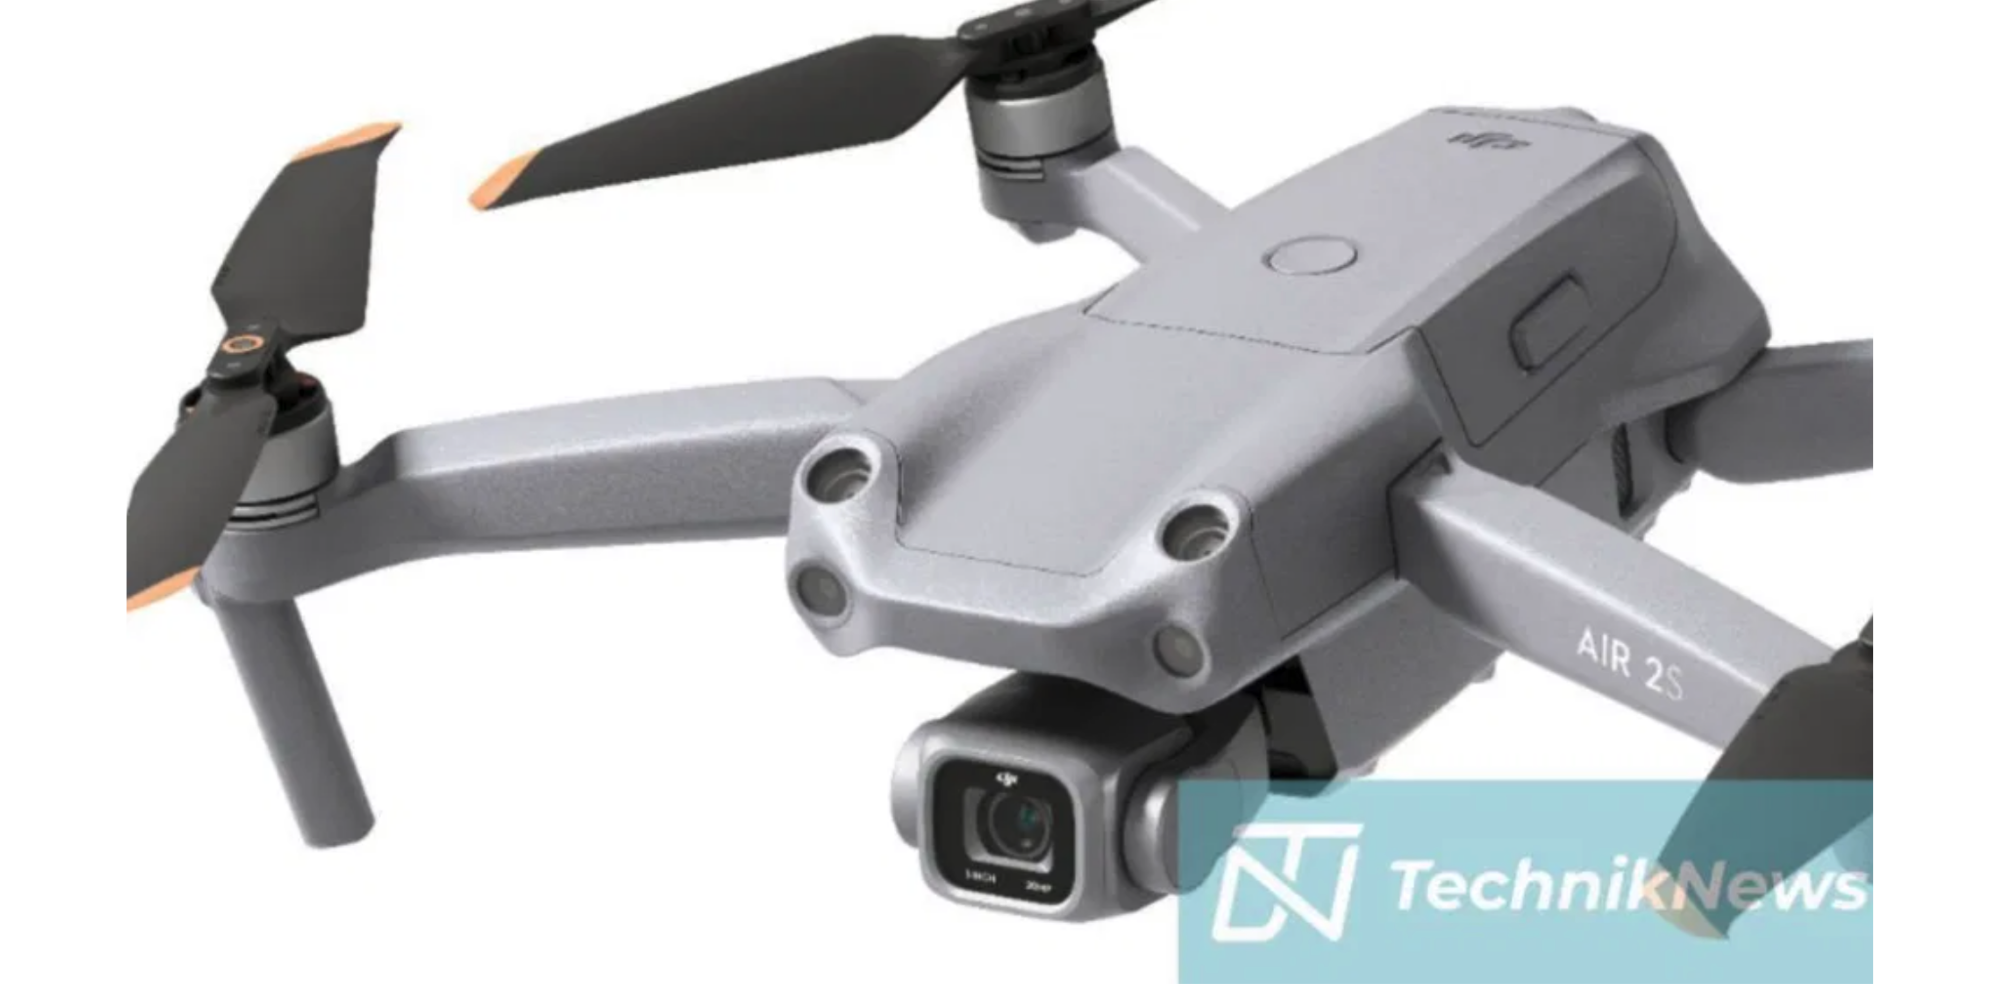 DJI's at retailers; April 15 reported date - DroneDJ